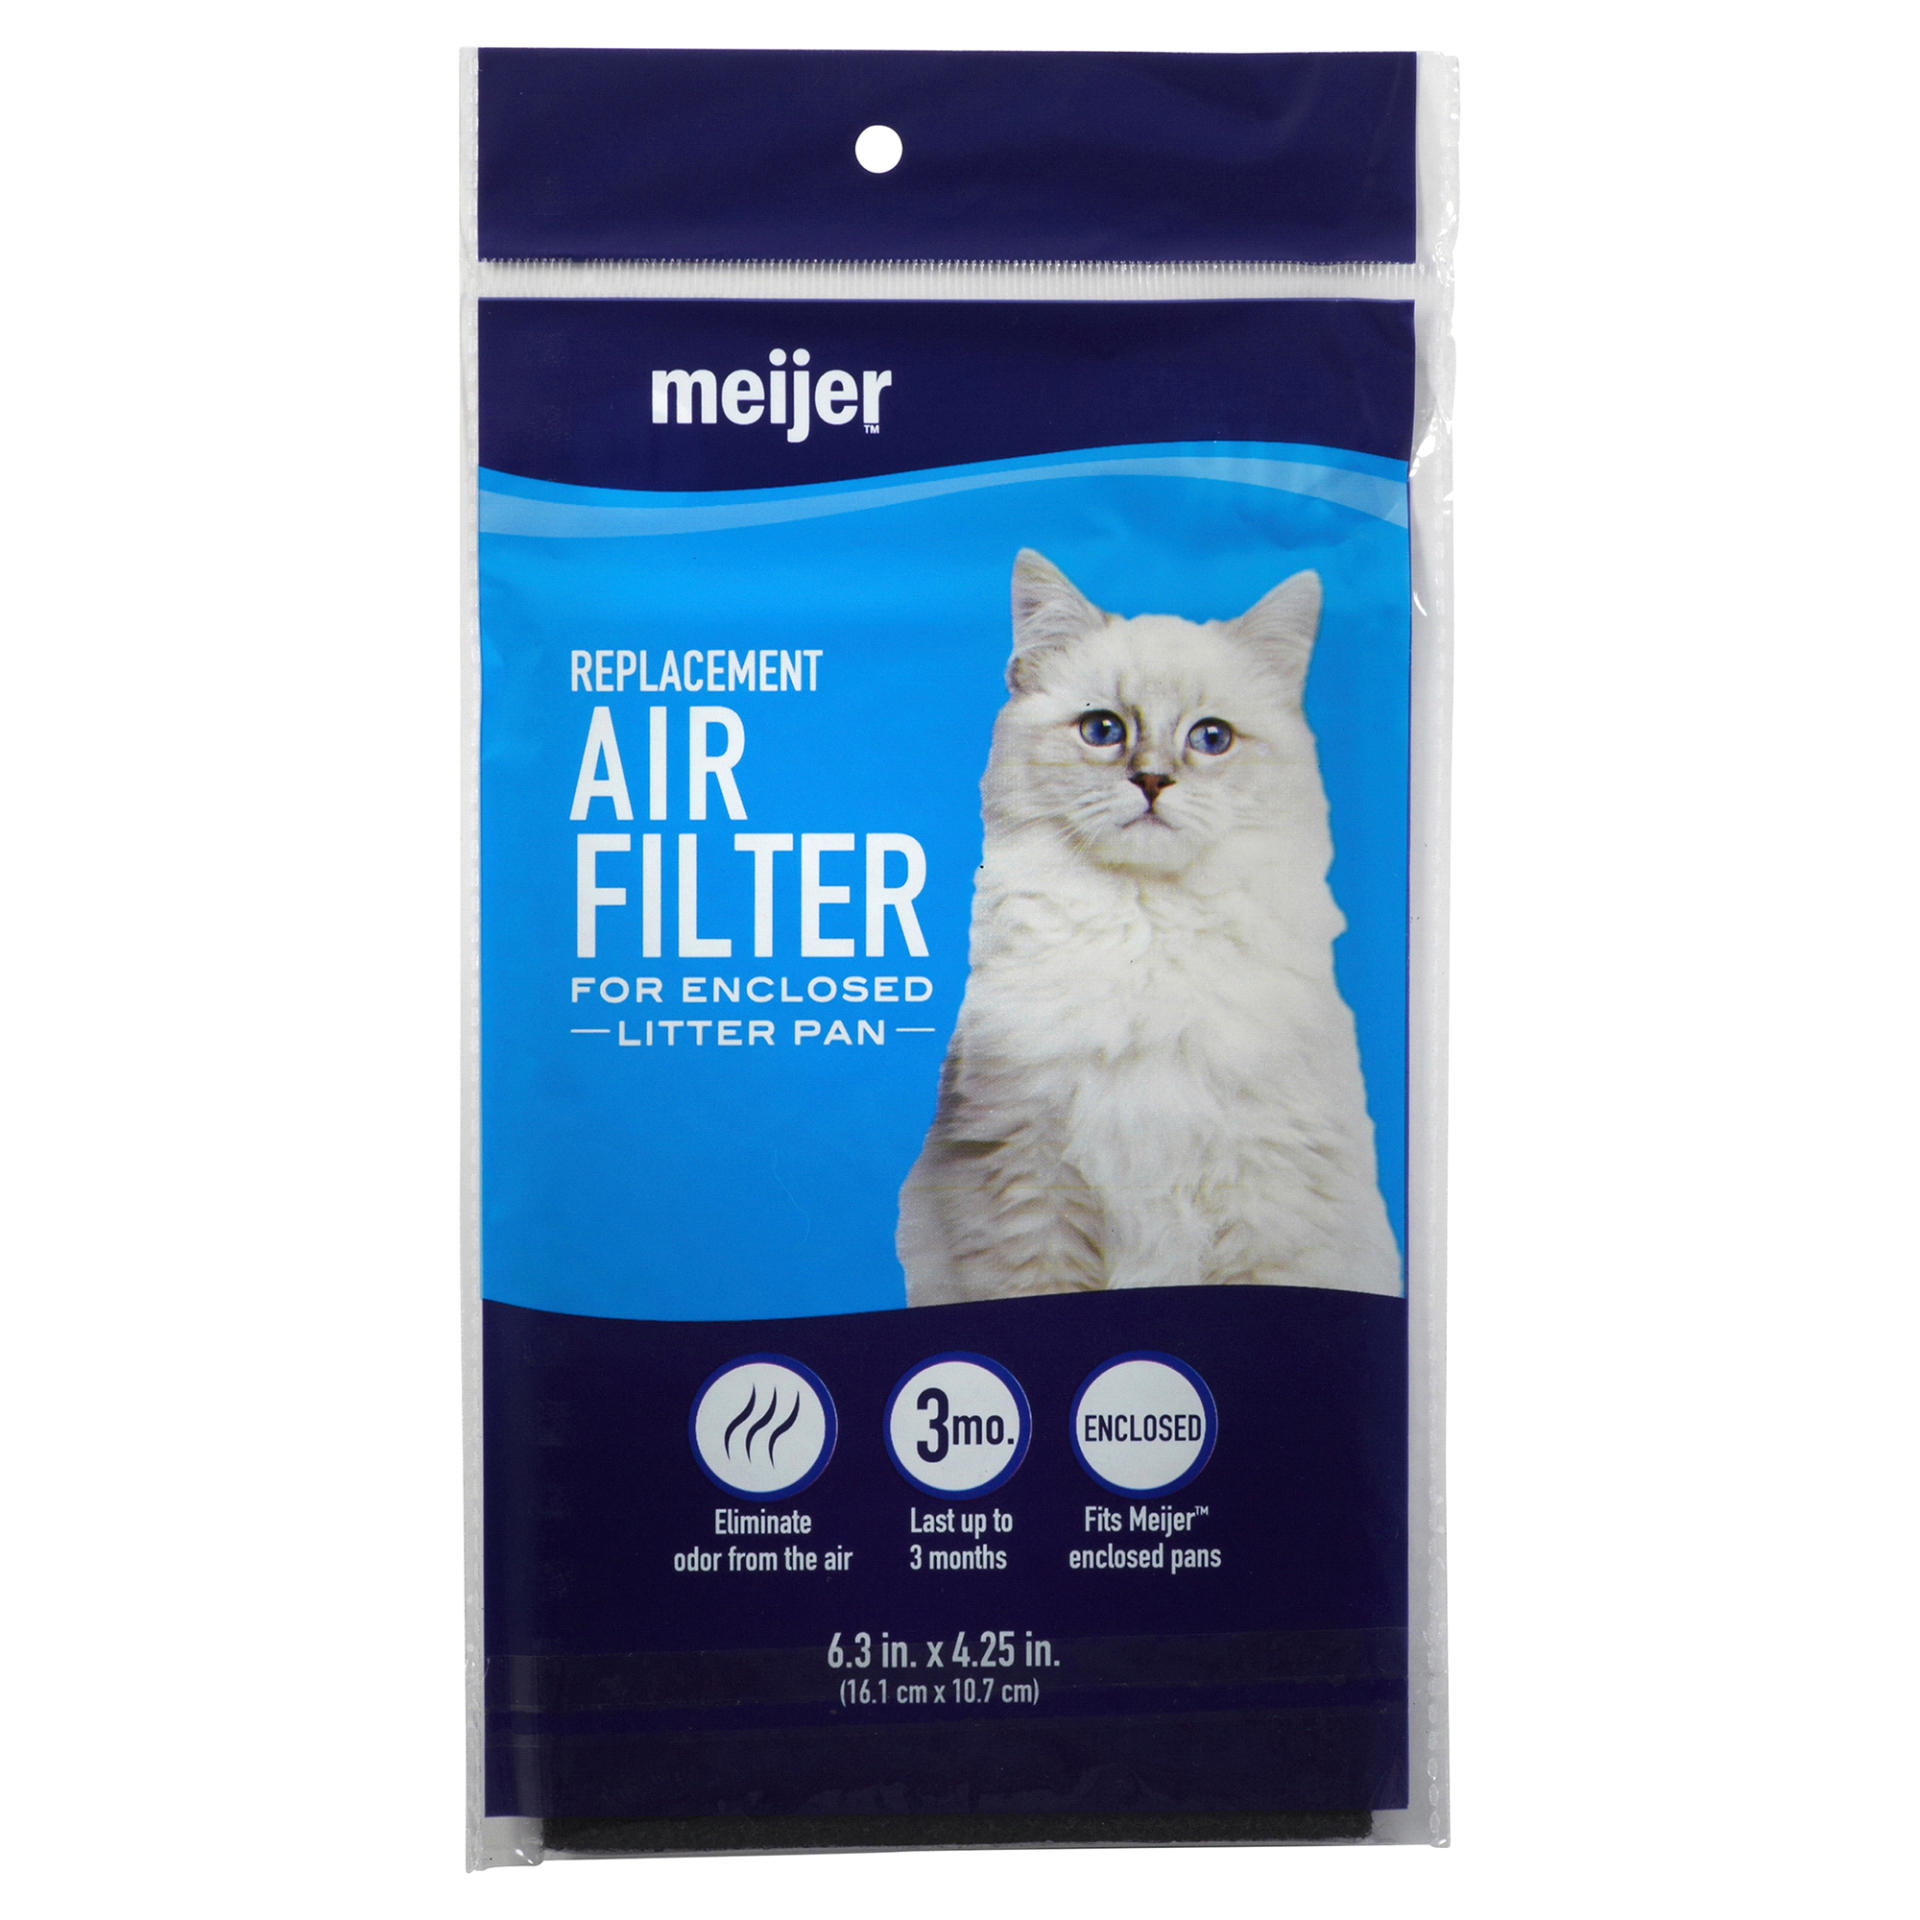 slide 1 of 2, Meijer Replacement Air Filter for Enclosed Litter Pan, 1 ct